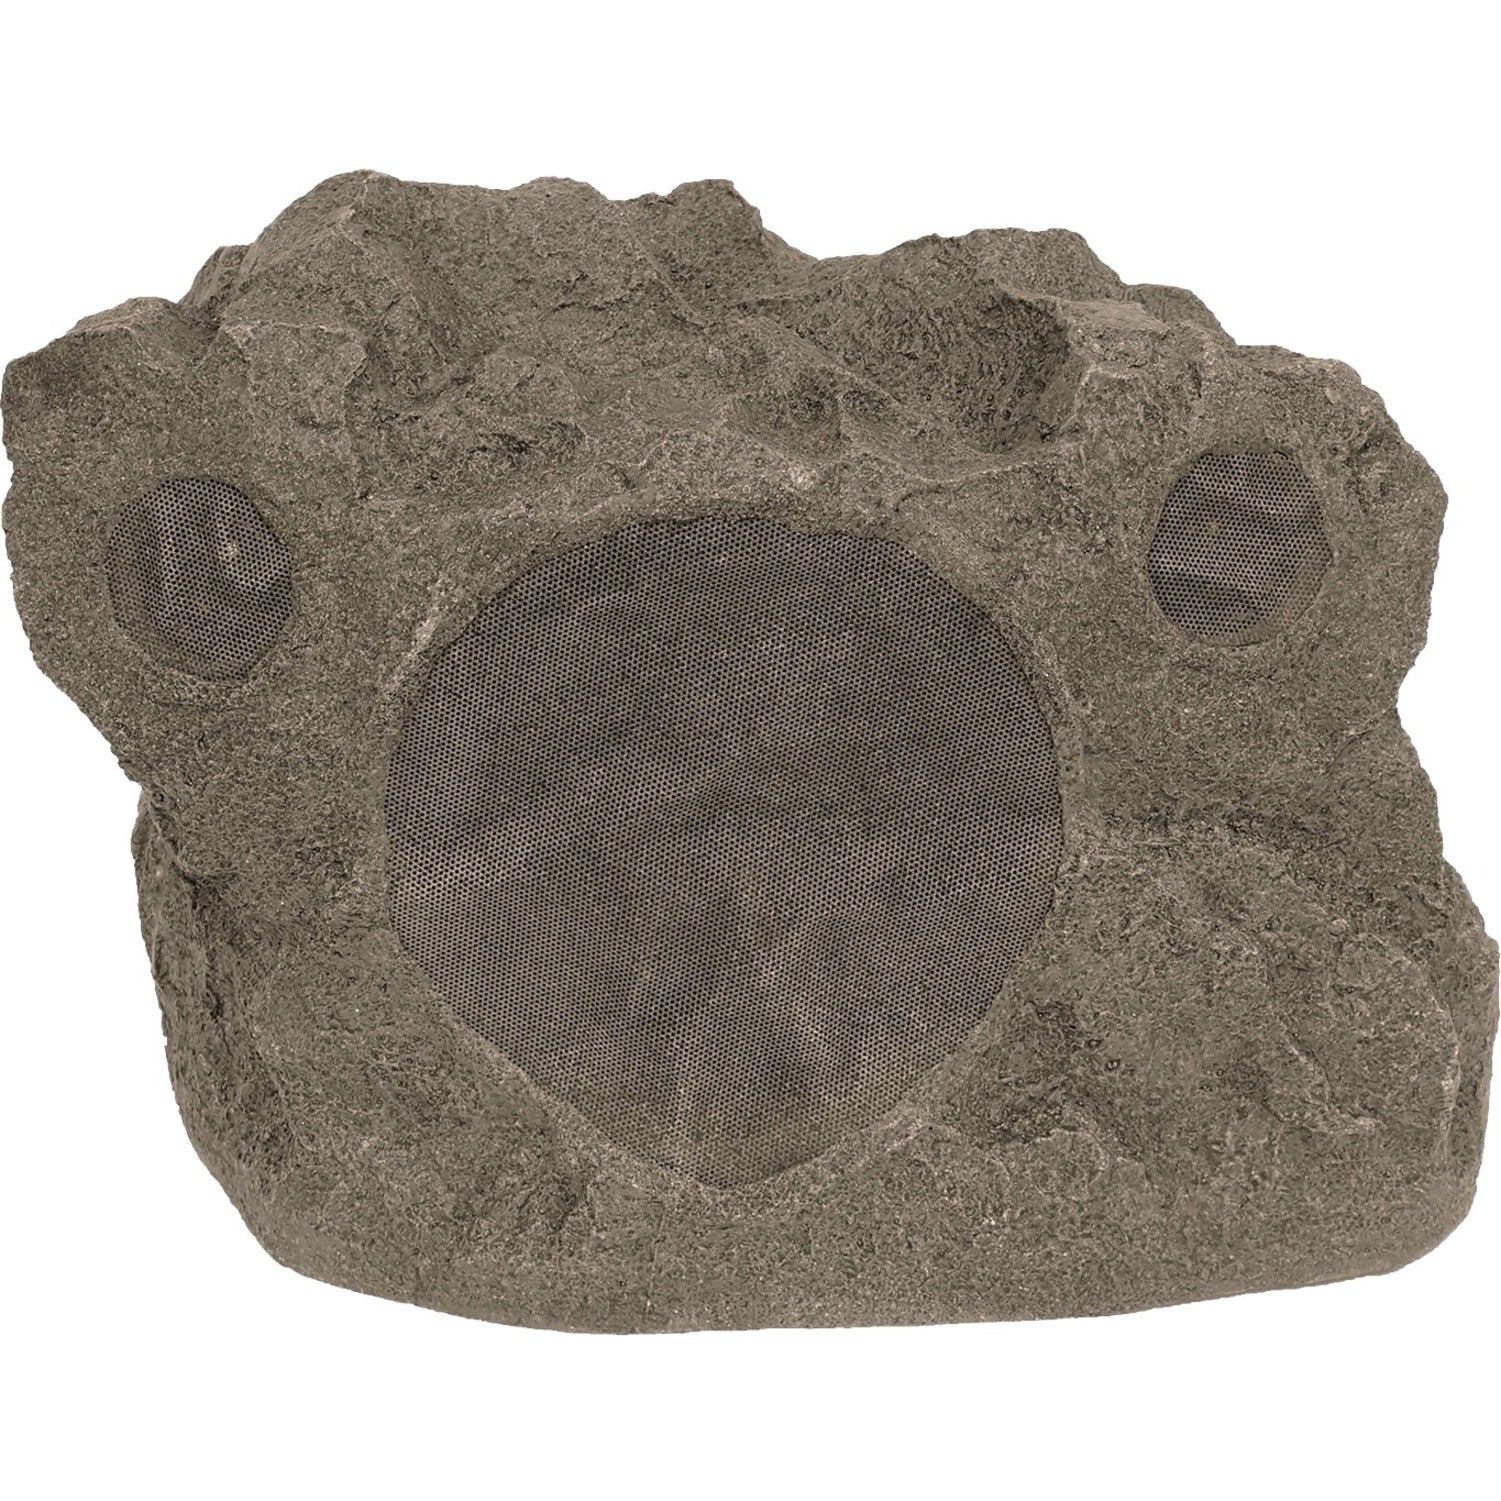 Proficient Audio PAS-RS8SI-SHALEBROWN Protege RS8Si 8" DVC/SST Outdoor Rock Speaker, Shale Brown, 10 Year Warranty